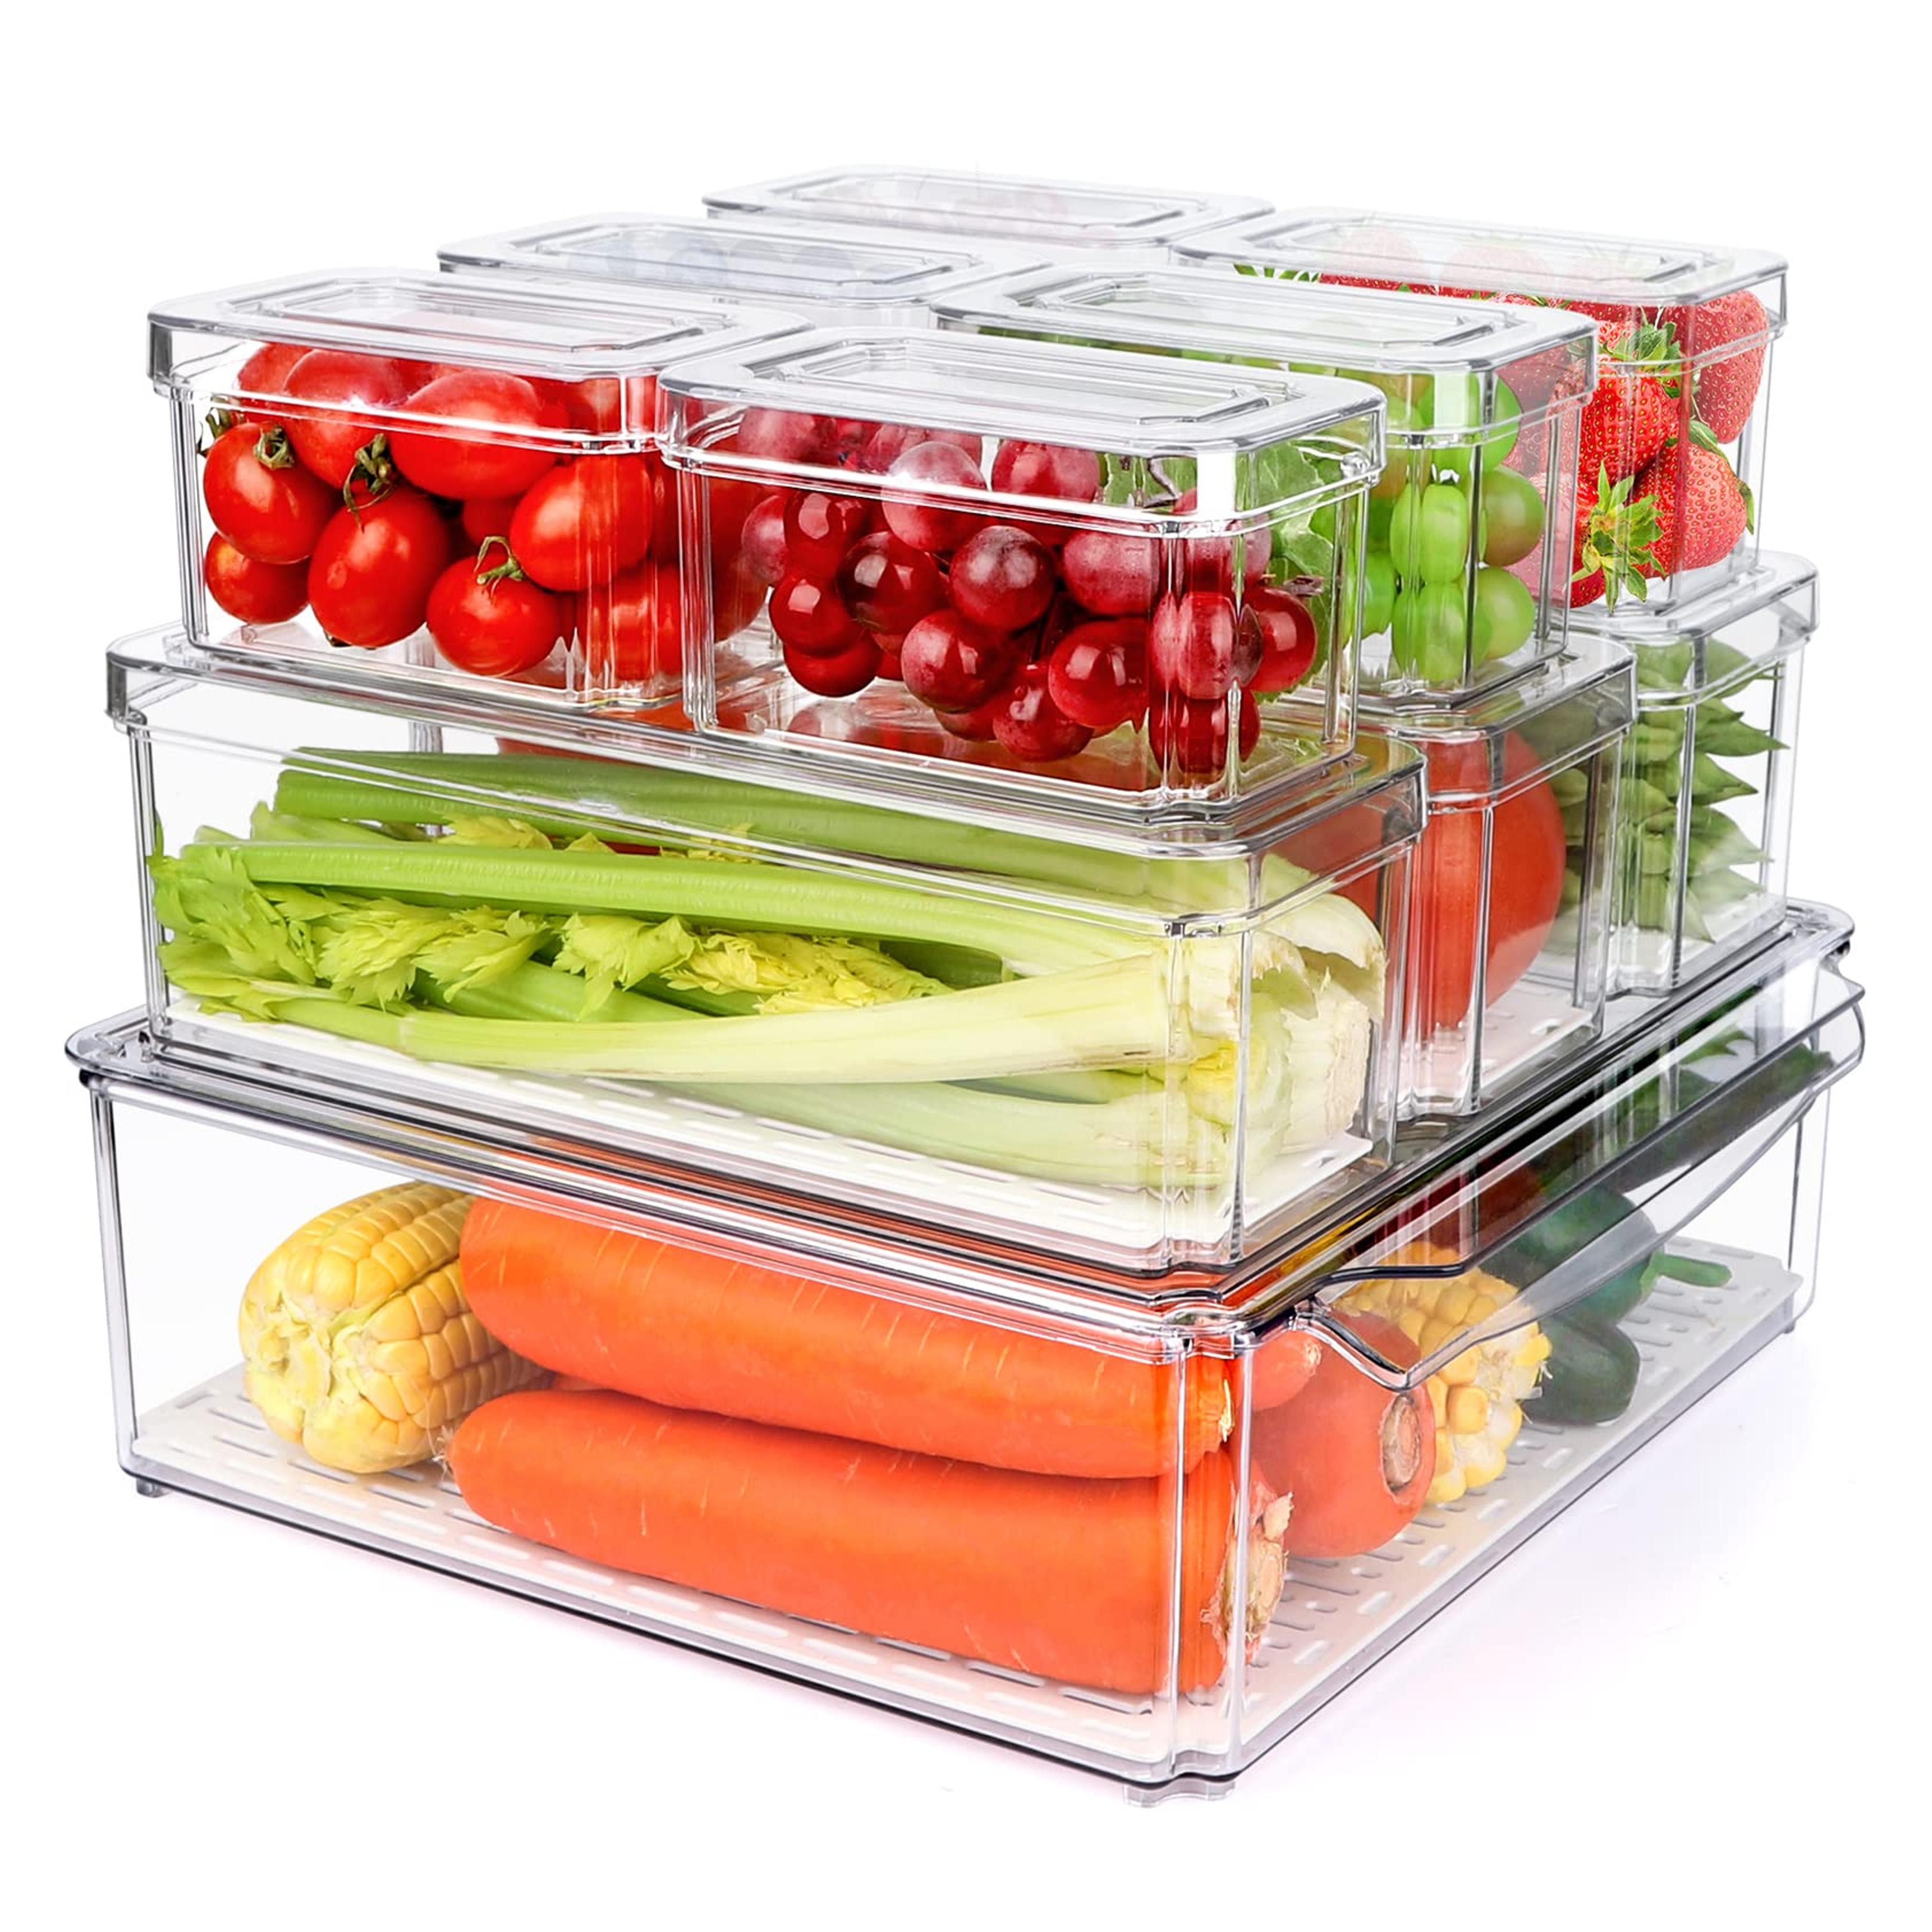 10 Pack Refrigerator Pantry Organizer Bins, Stackable Fridge Bins with Lids, Clear Plastic for Kitchen, Countertops, Cabinets, Fridge, Drinks, Fruits, Vegetable, Cereals